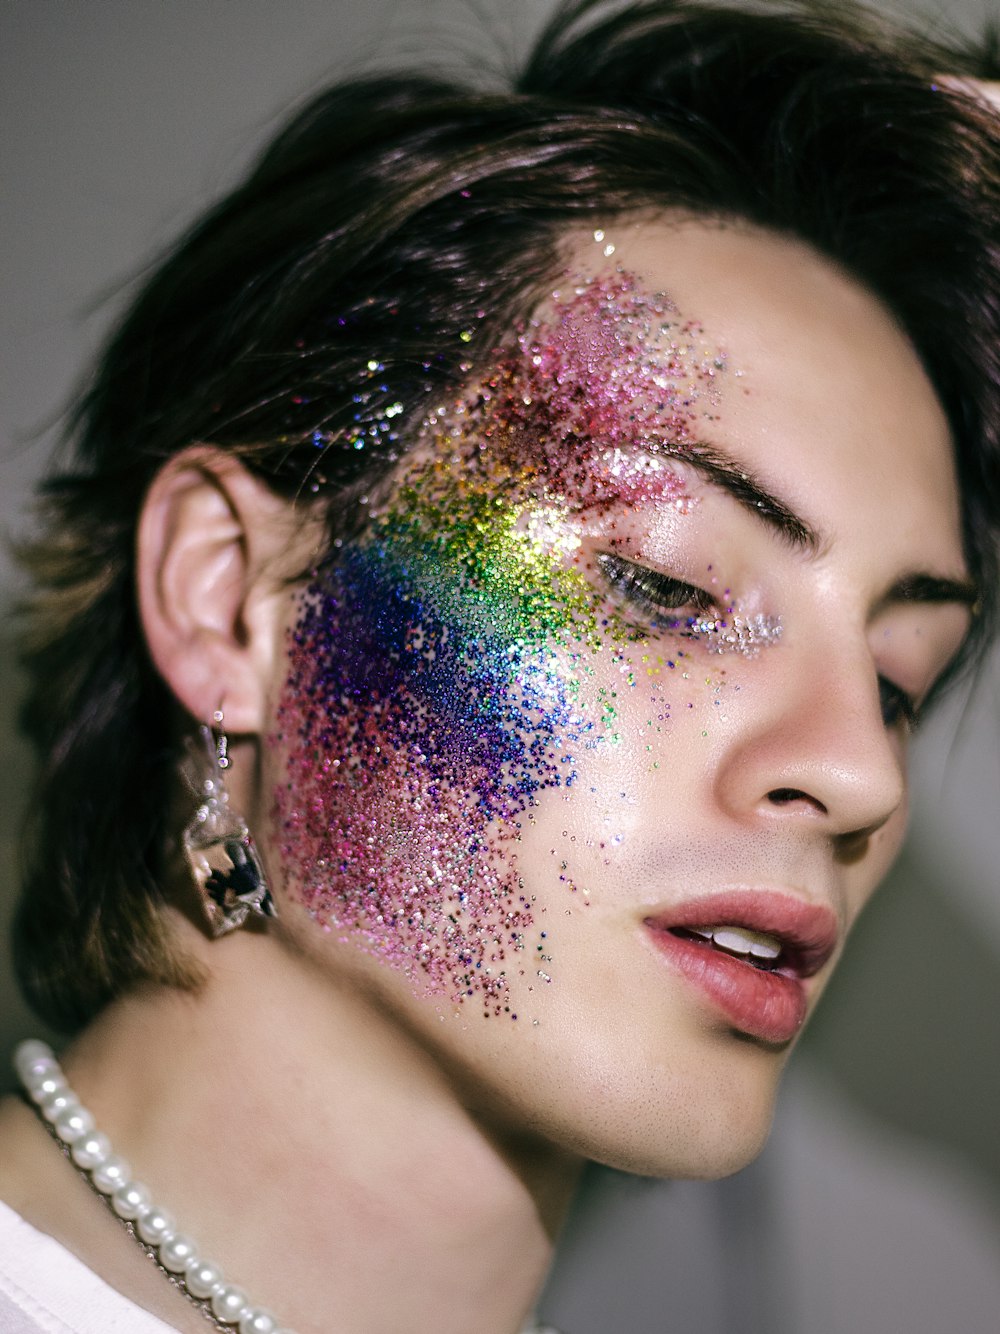 a man with his face covered in glitter